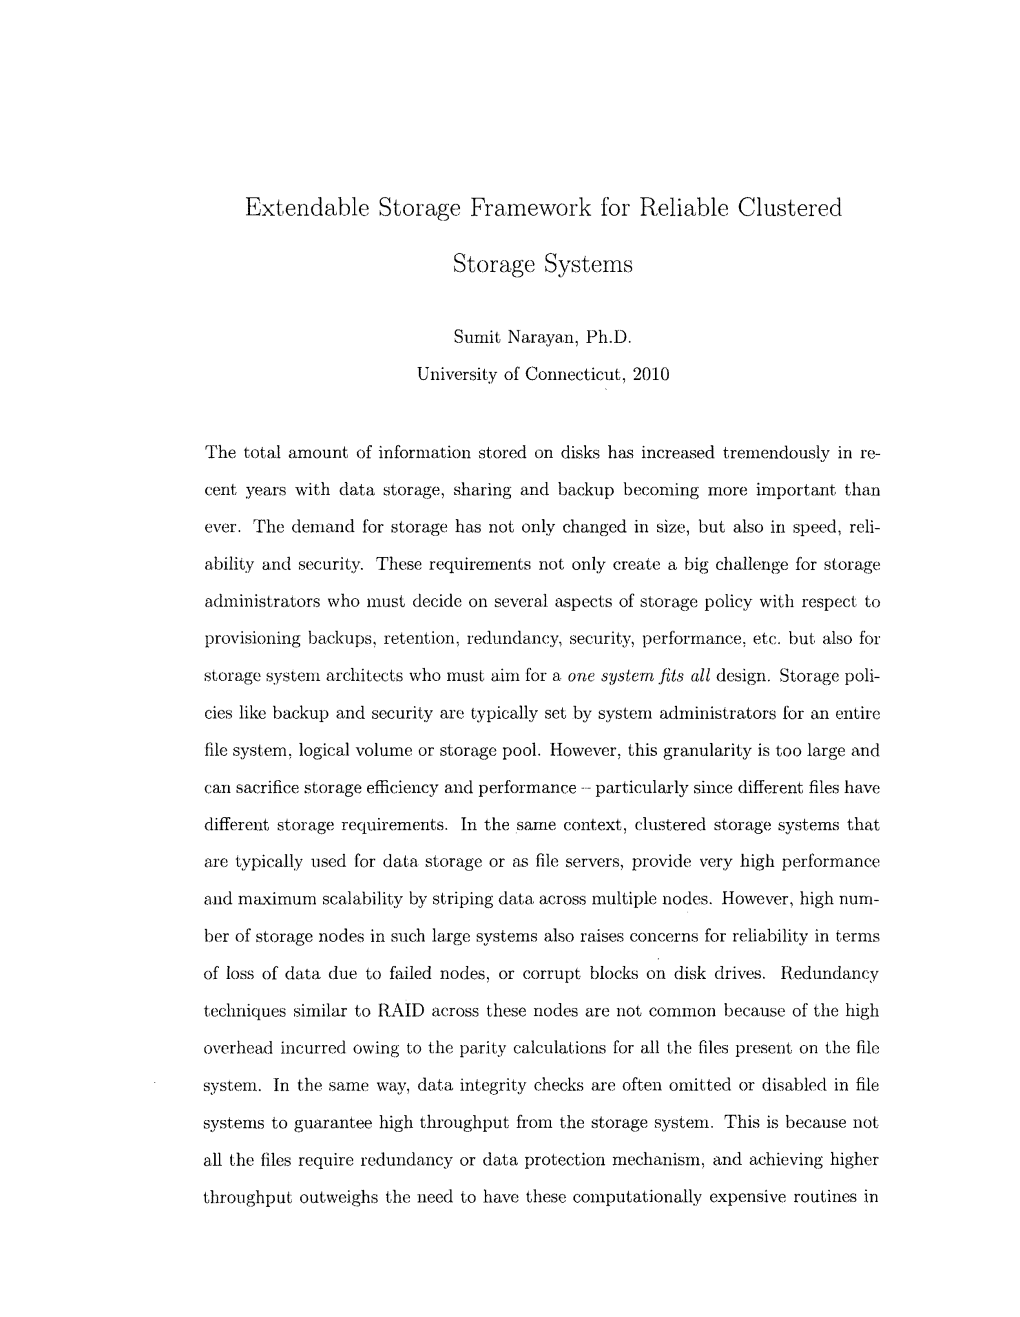 Extendable Storage Framework for Reliable Clustered Storage Systems by Sumit Narayan B.E., University of Madras, 2002 M.S., University of Connecticut, 2004